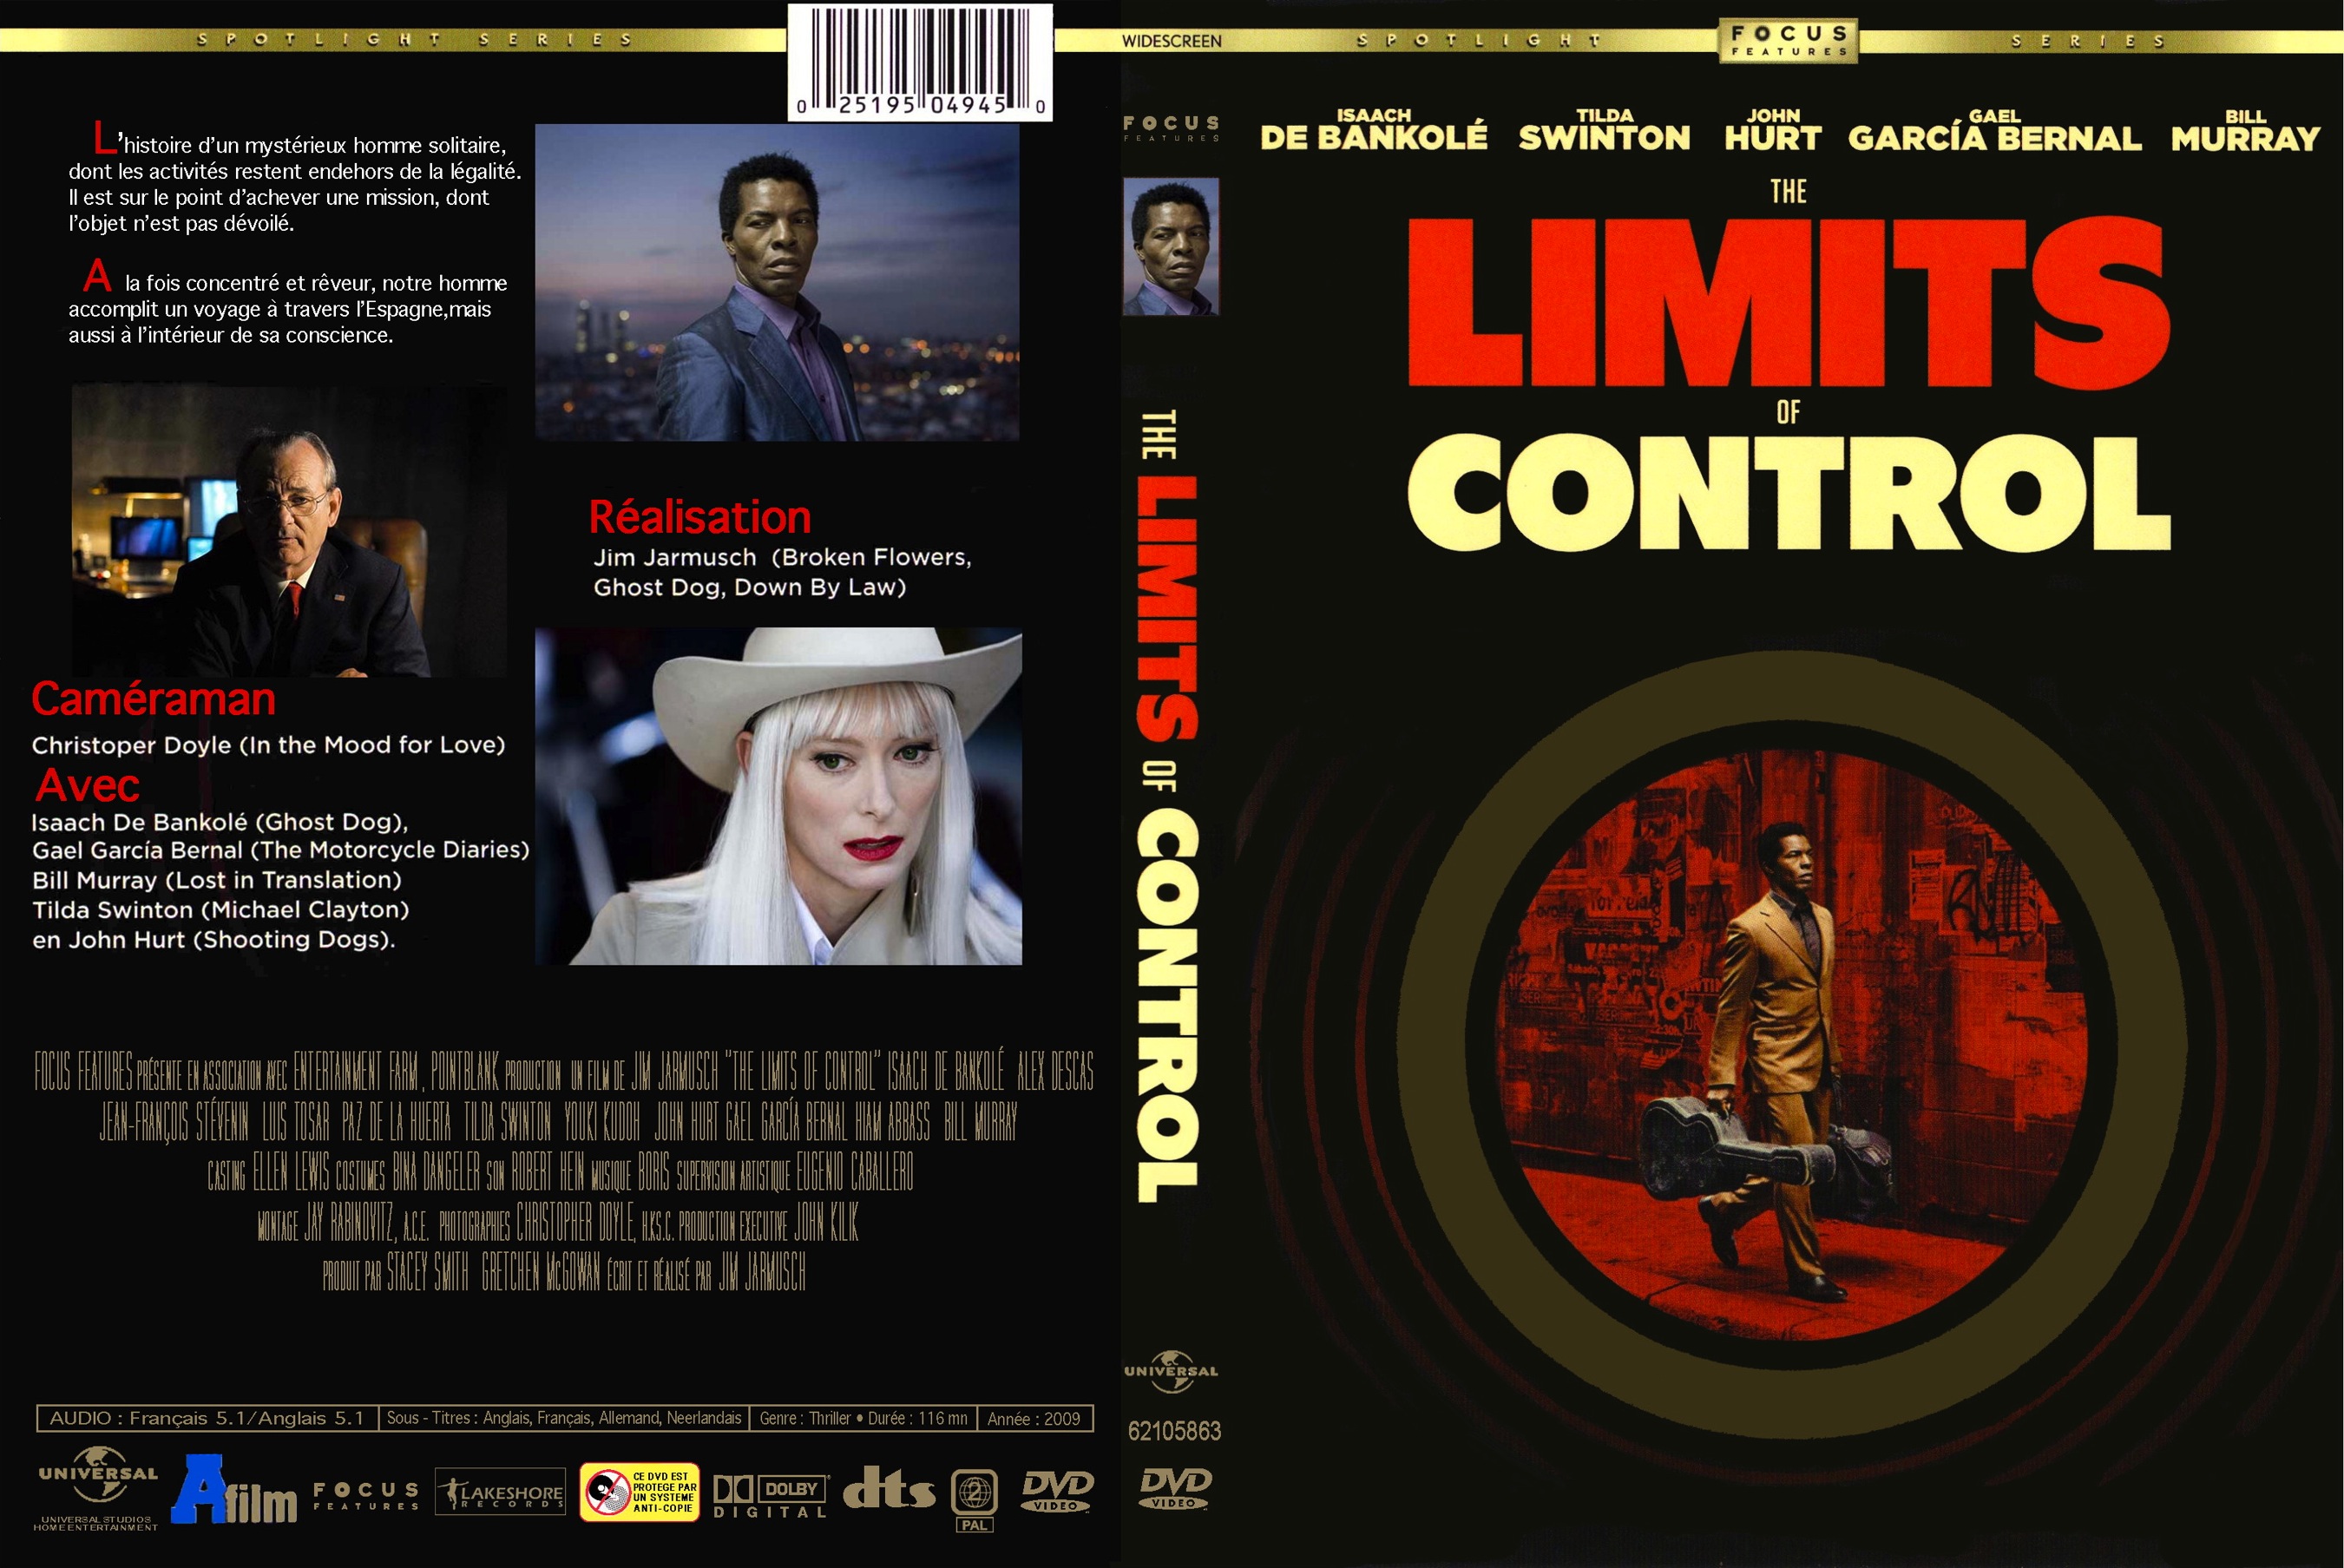 Jaquette DVD The limits of control custom